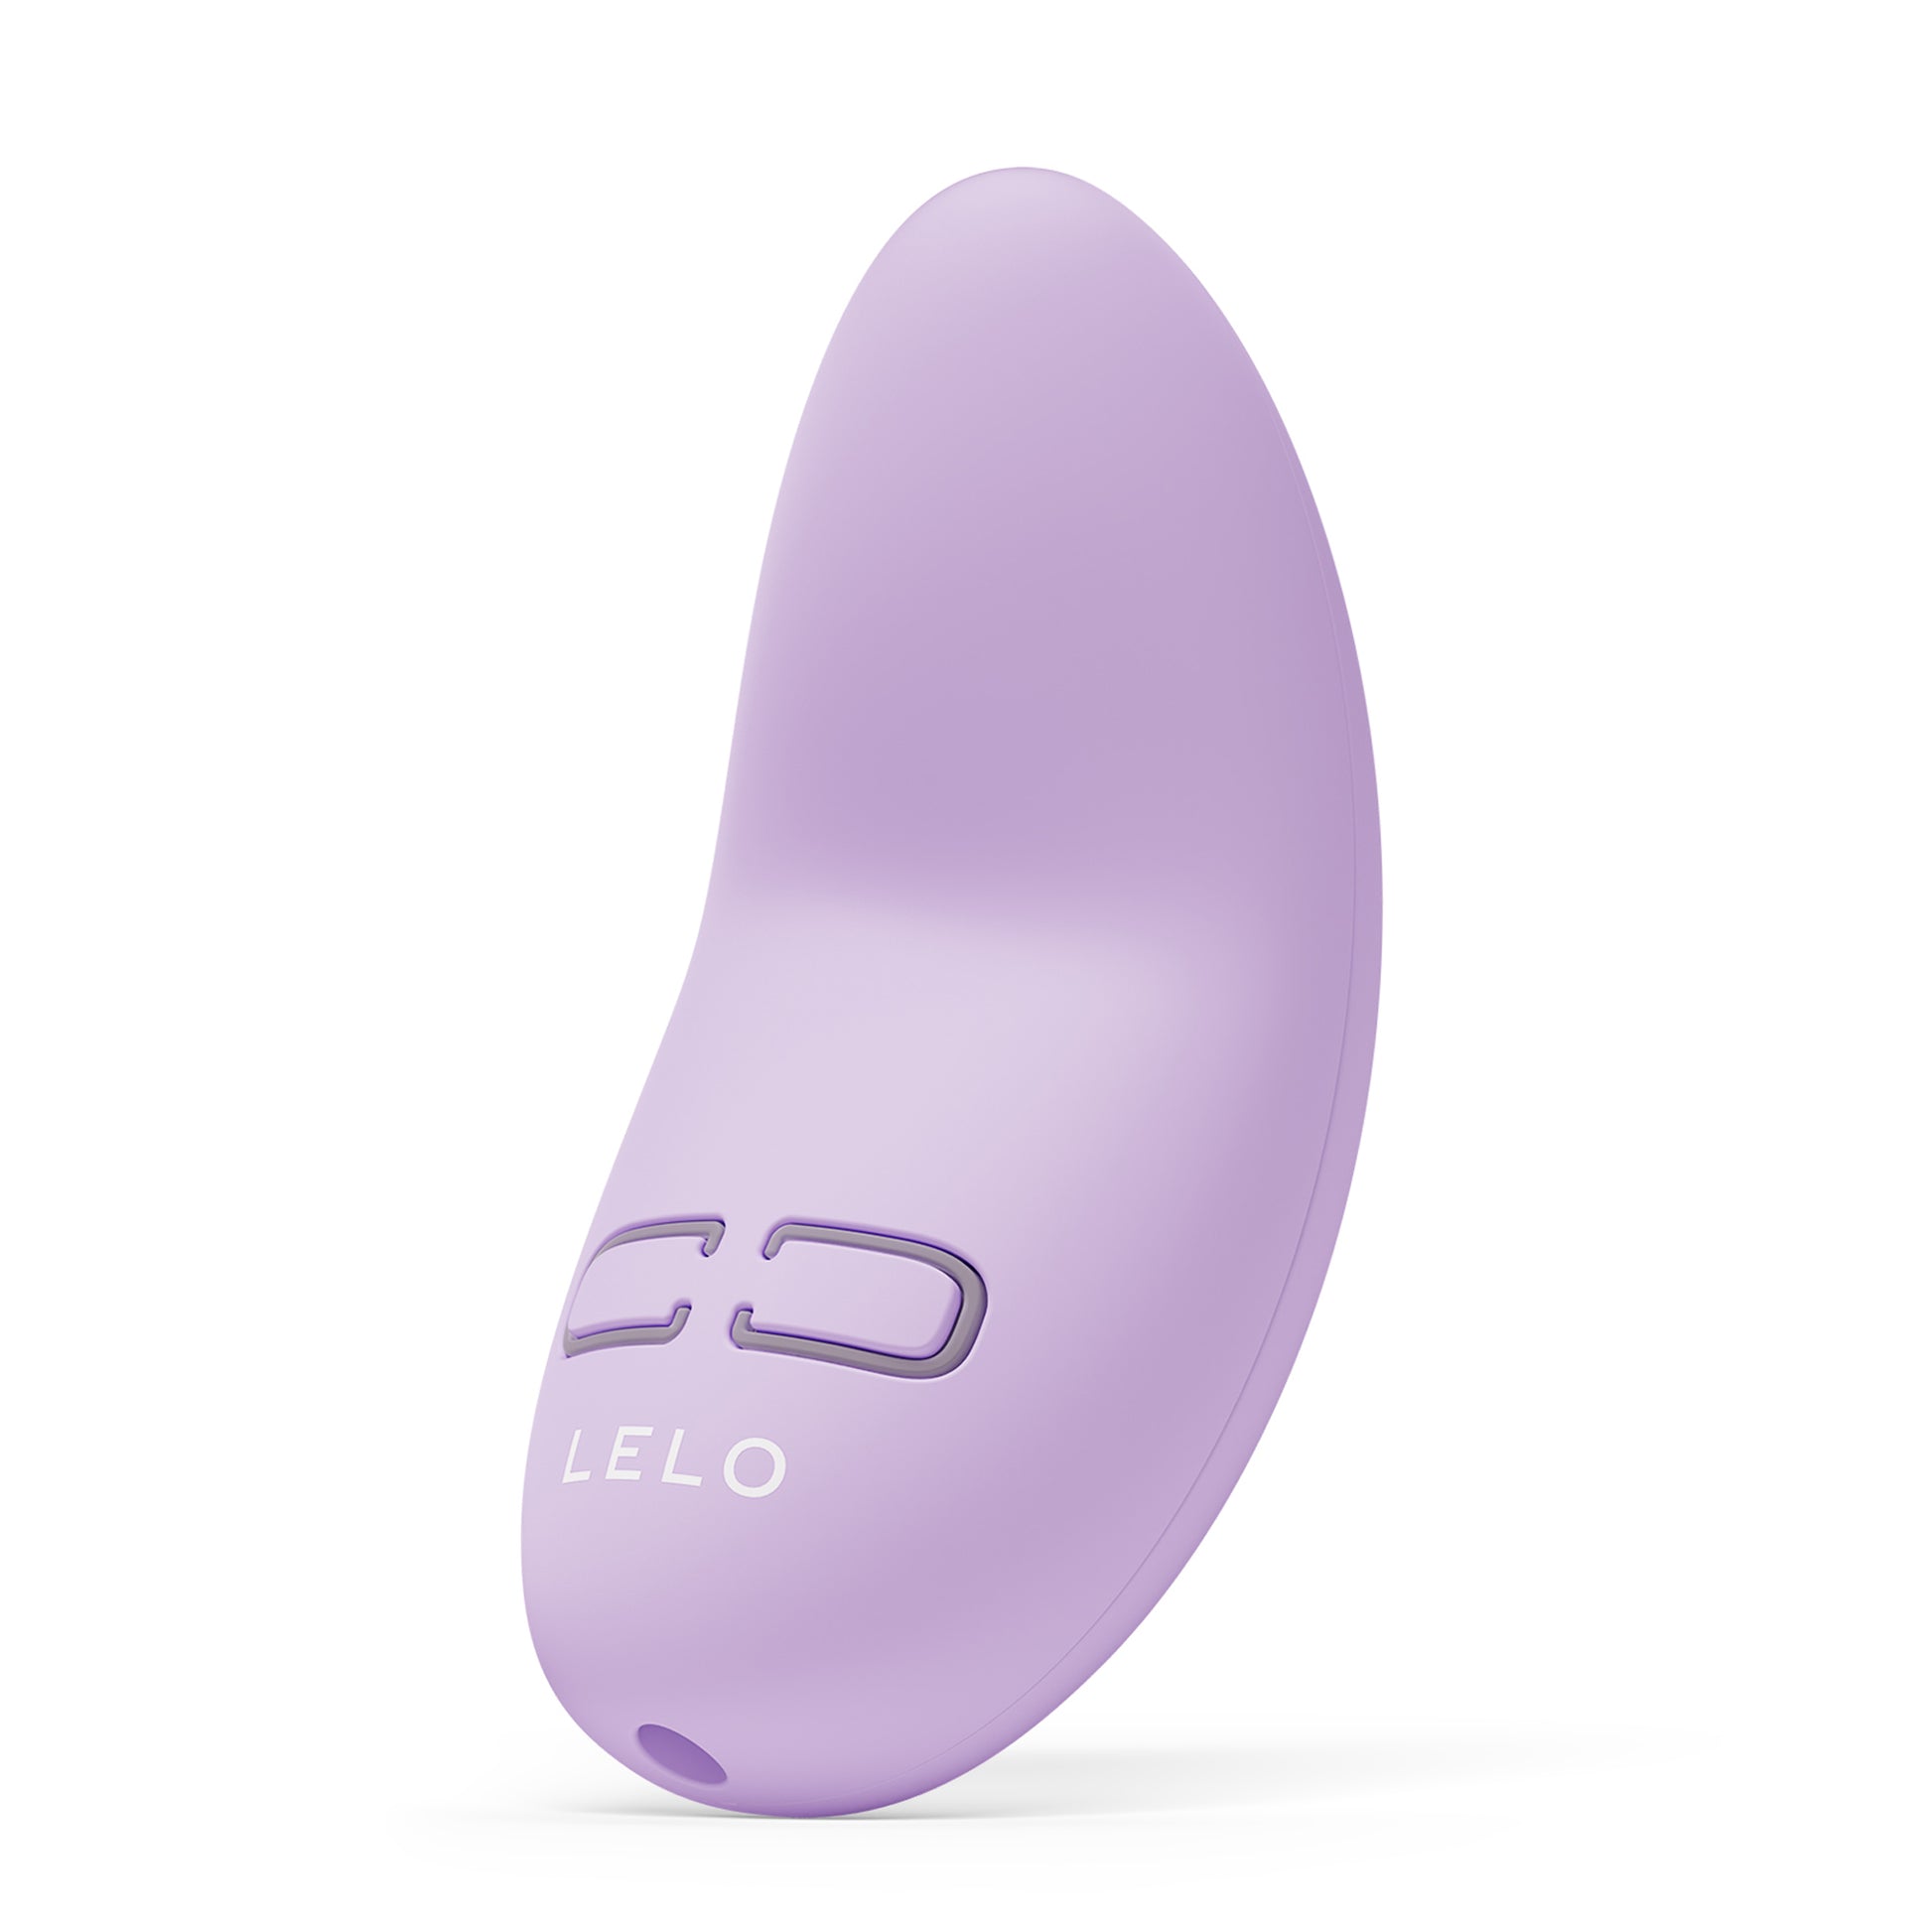 Lelo - Lily 3 Personal Massager Calm Lavender - 0